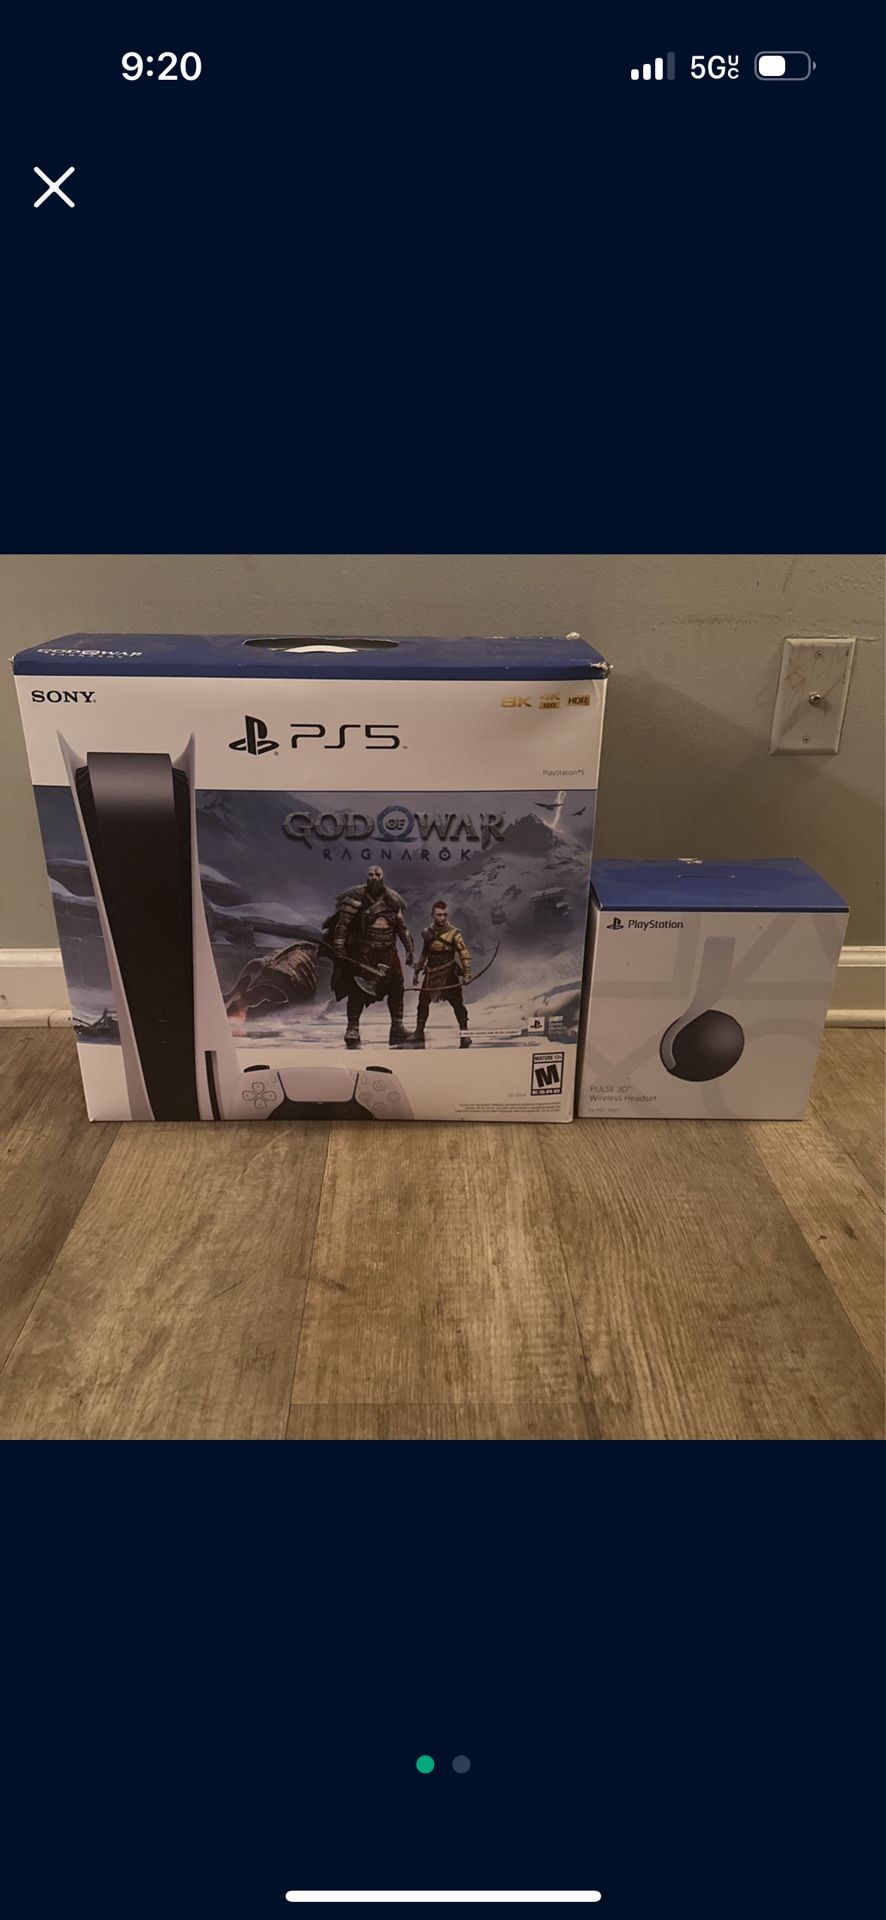 New Ps5 With 2 Controllers Ps5 Headset & Gold Of War